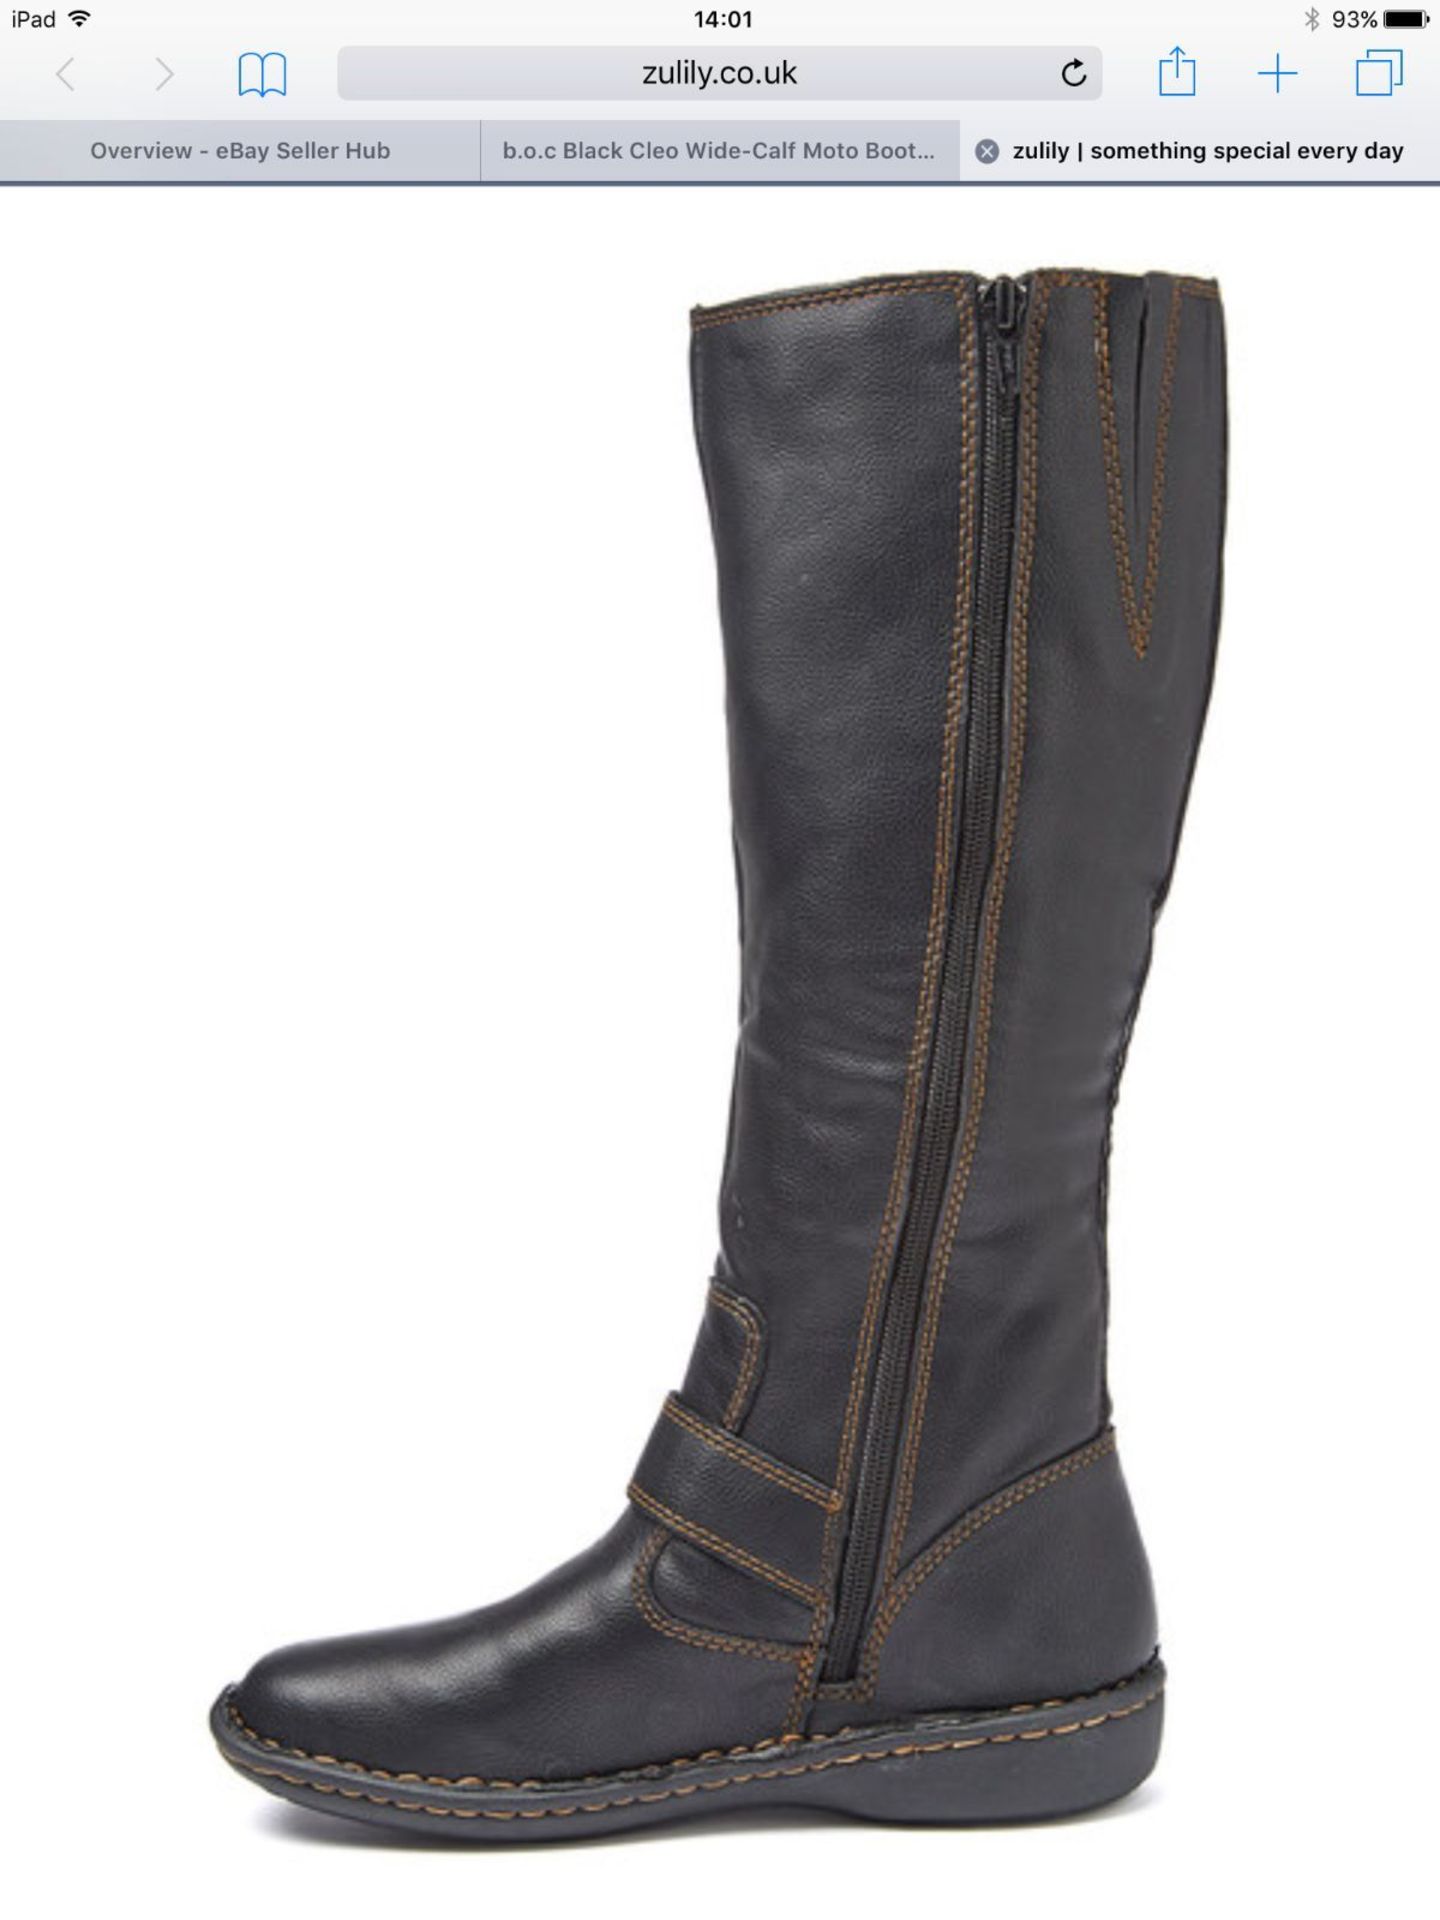 b.o.c. Black Cleo Wide-Calf Moto Boot, Size Eur 38, RRP £130.99 (New with box) - Image 2 of 3